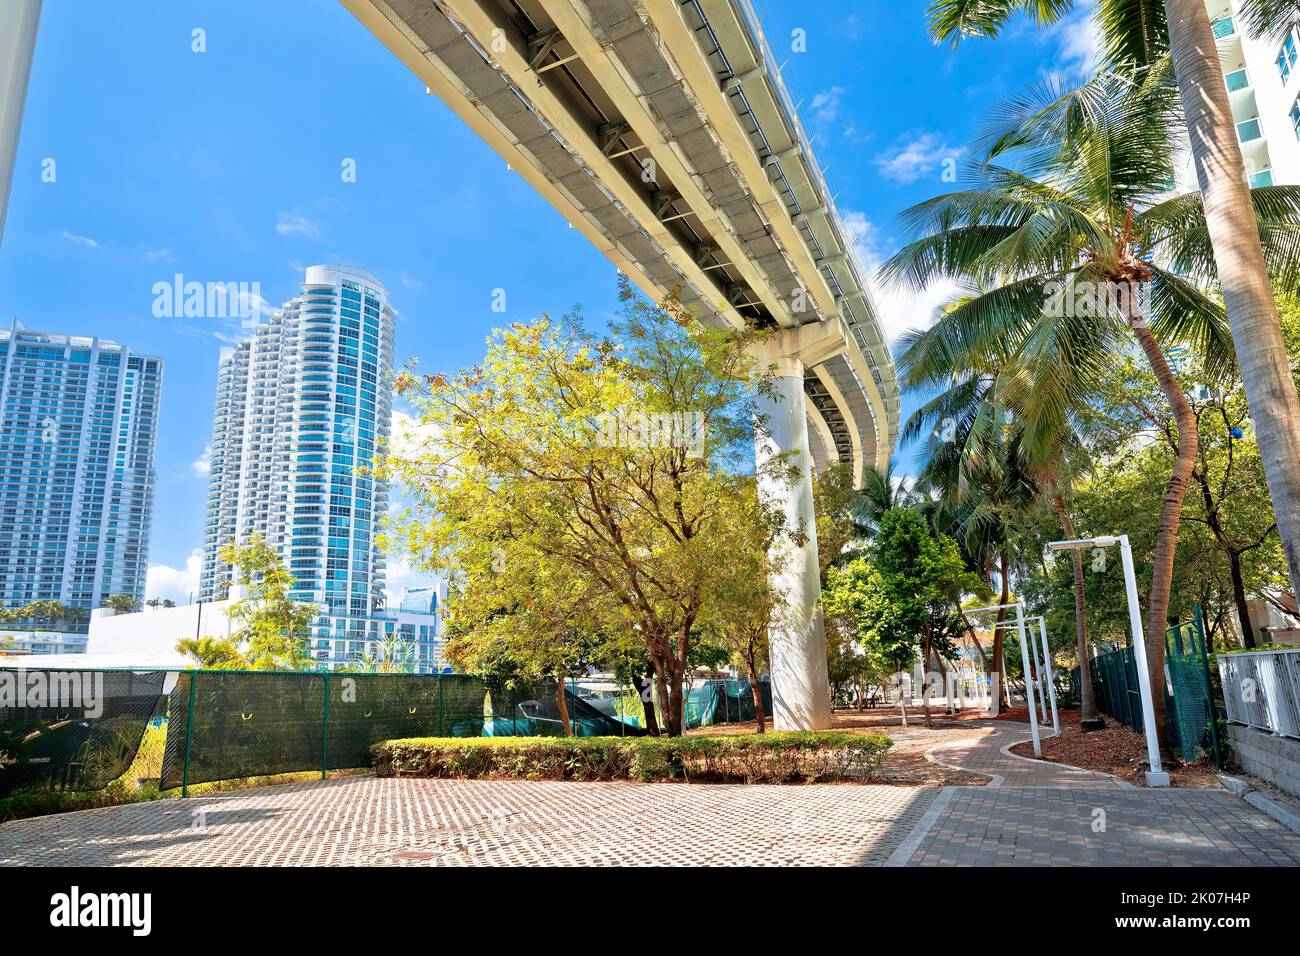 Miami downtown street view under mover train track, Florida state, United States of America Stock Photo